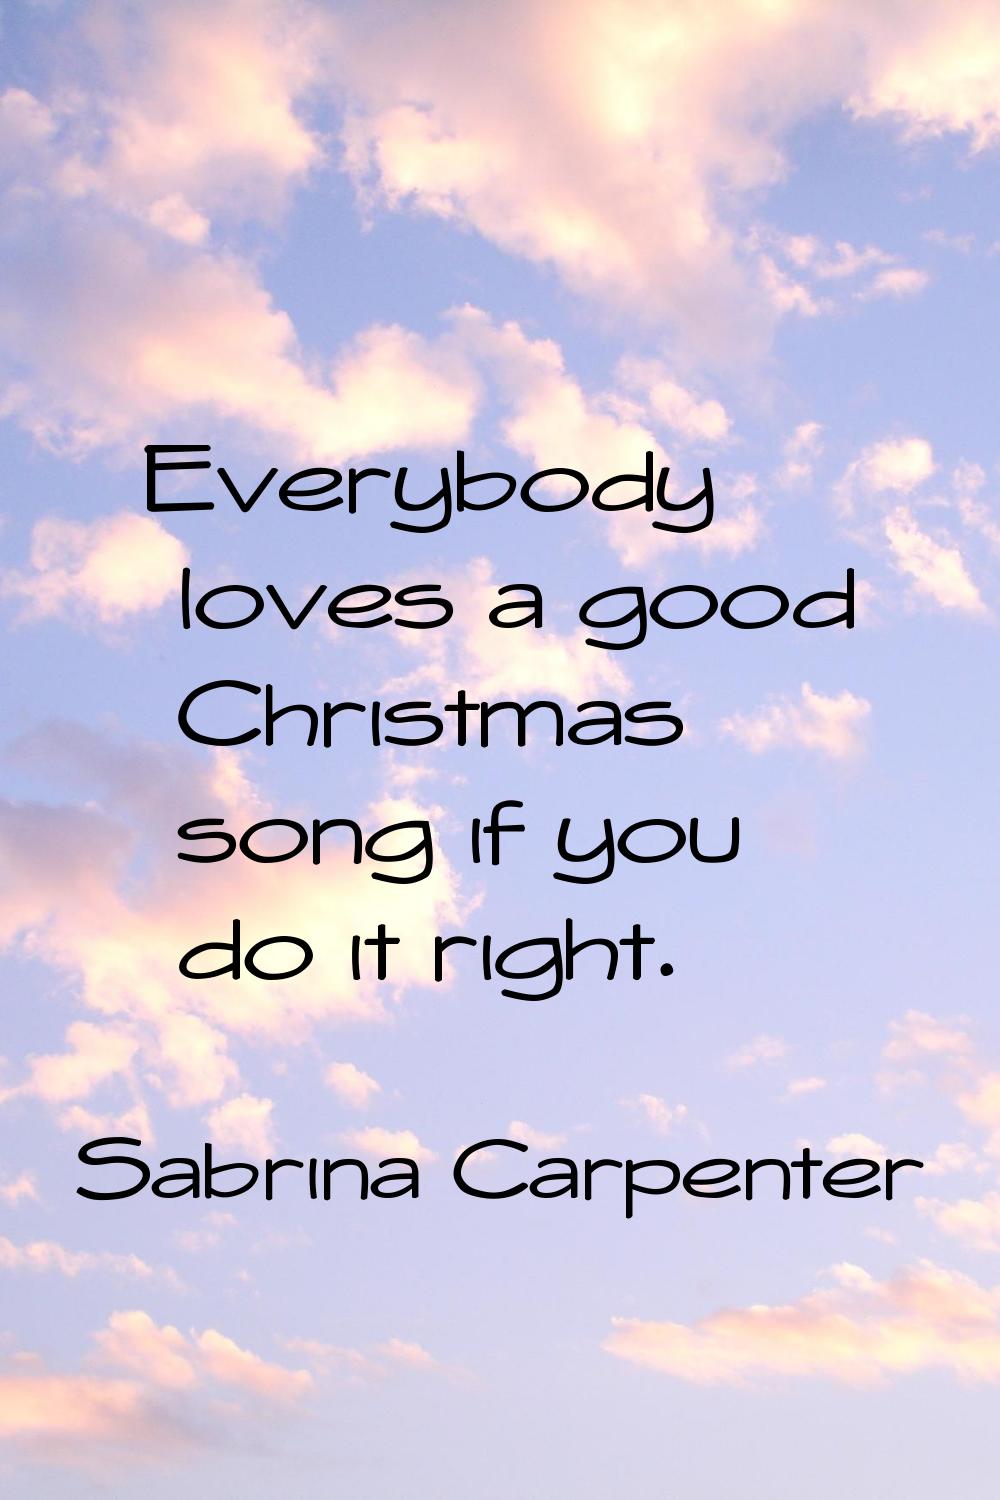 Everybody loves a good Christmas song if you do it right.